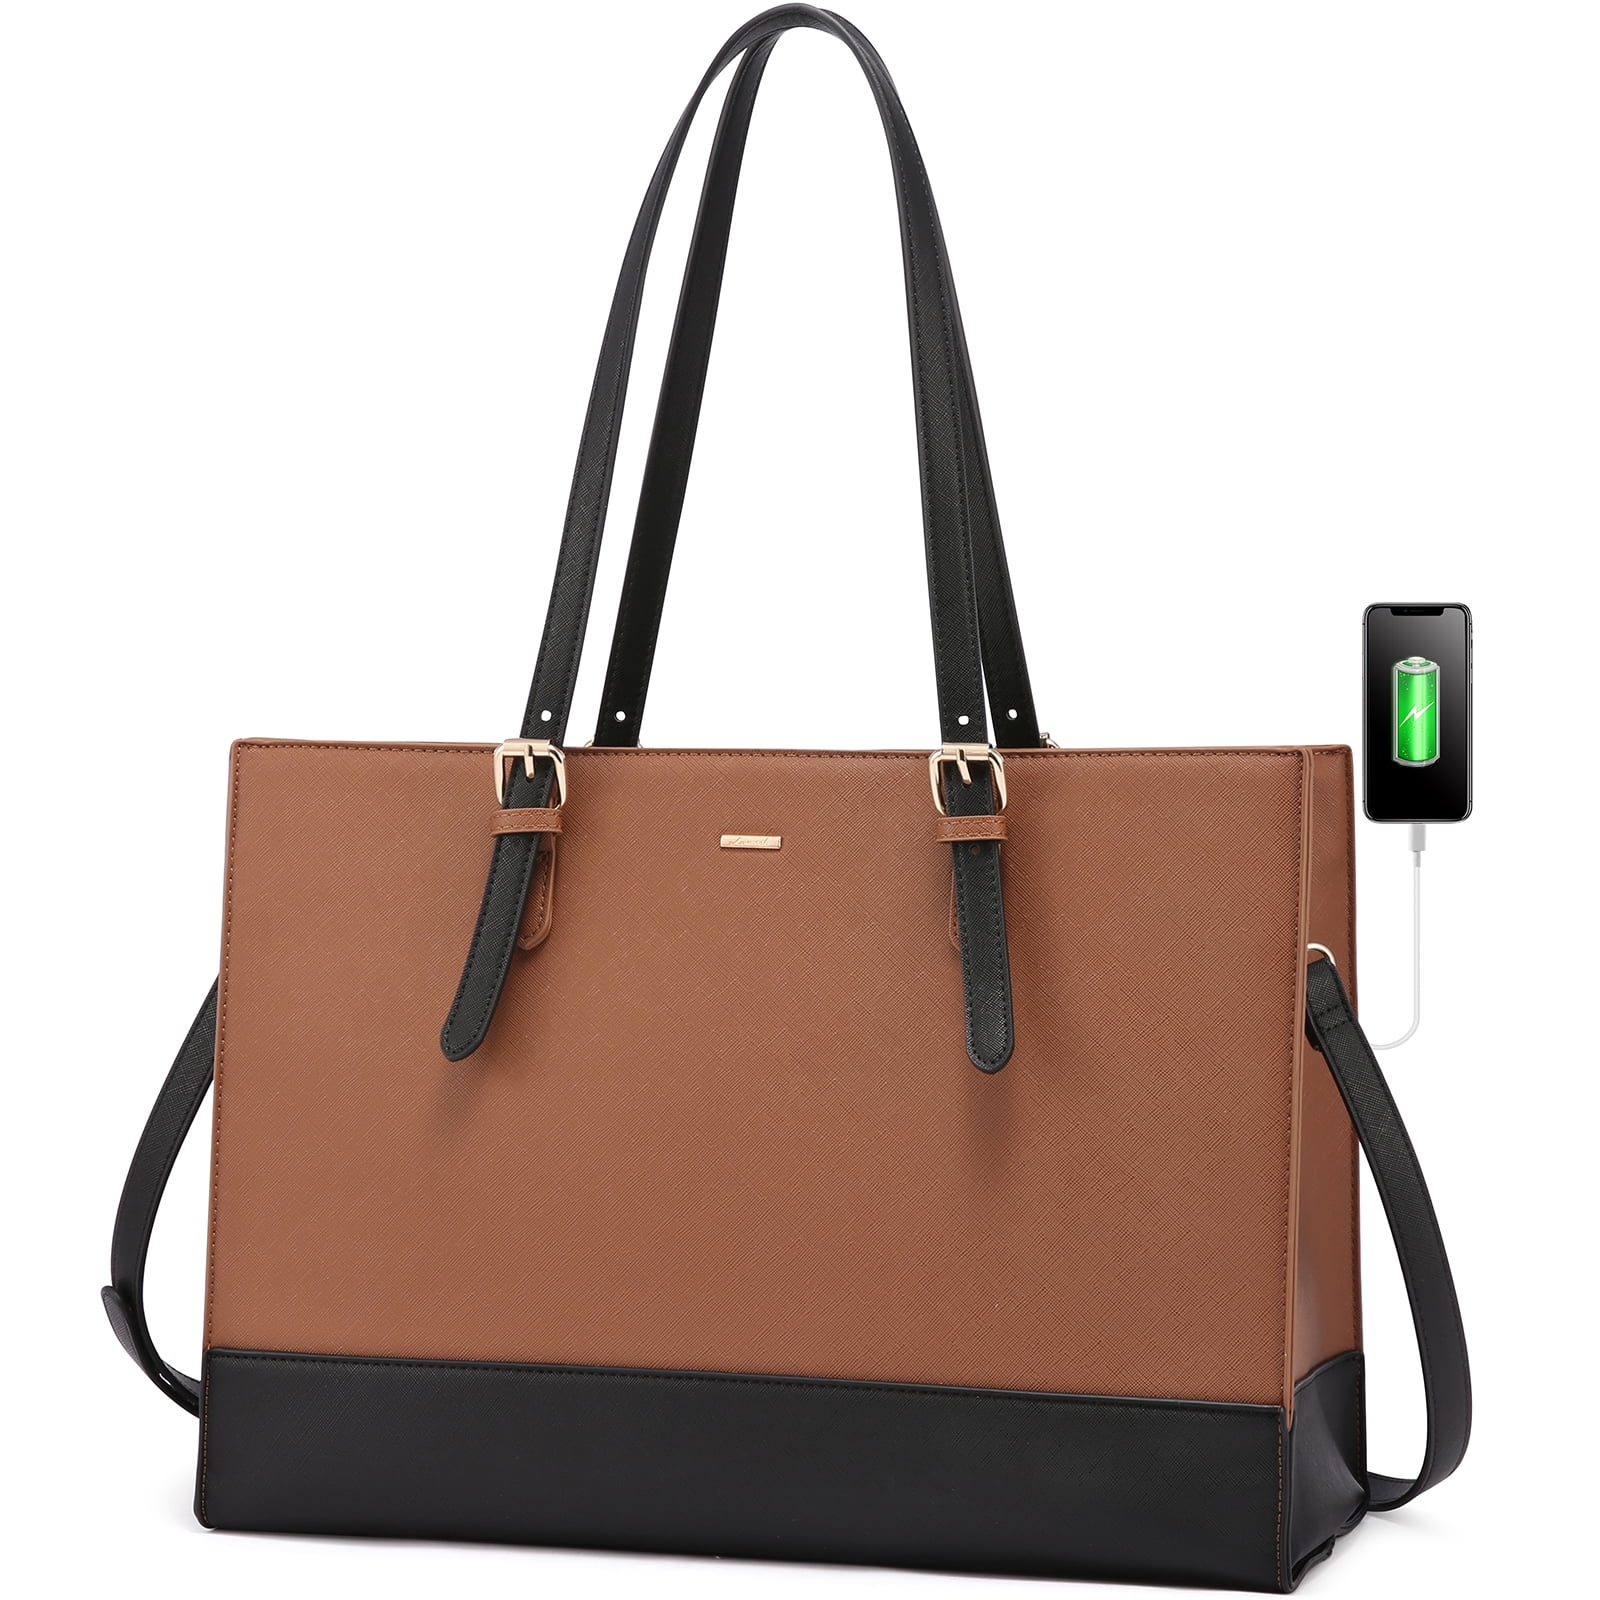 Buy Leather office side bag For Laptop - Laptop Bag for 14-16 Inch  Laptop/MacBook - 1 Year Warranty @ ₹3,898.00